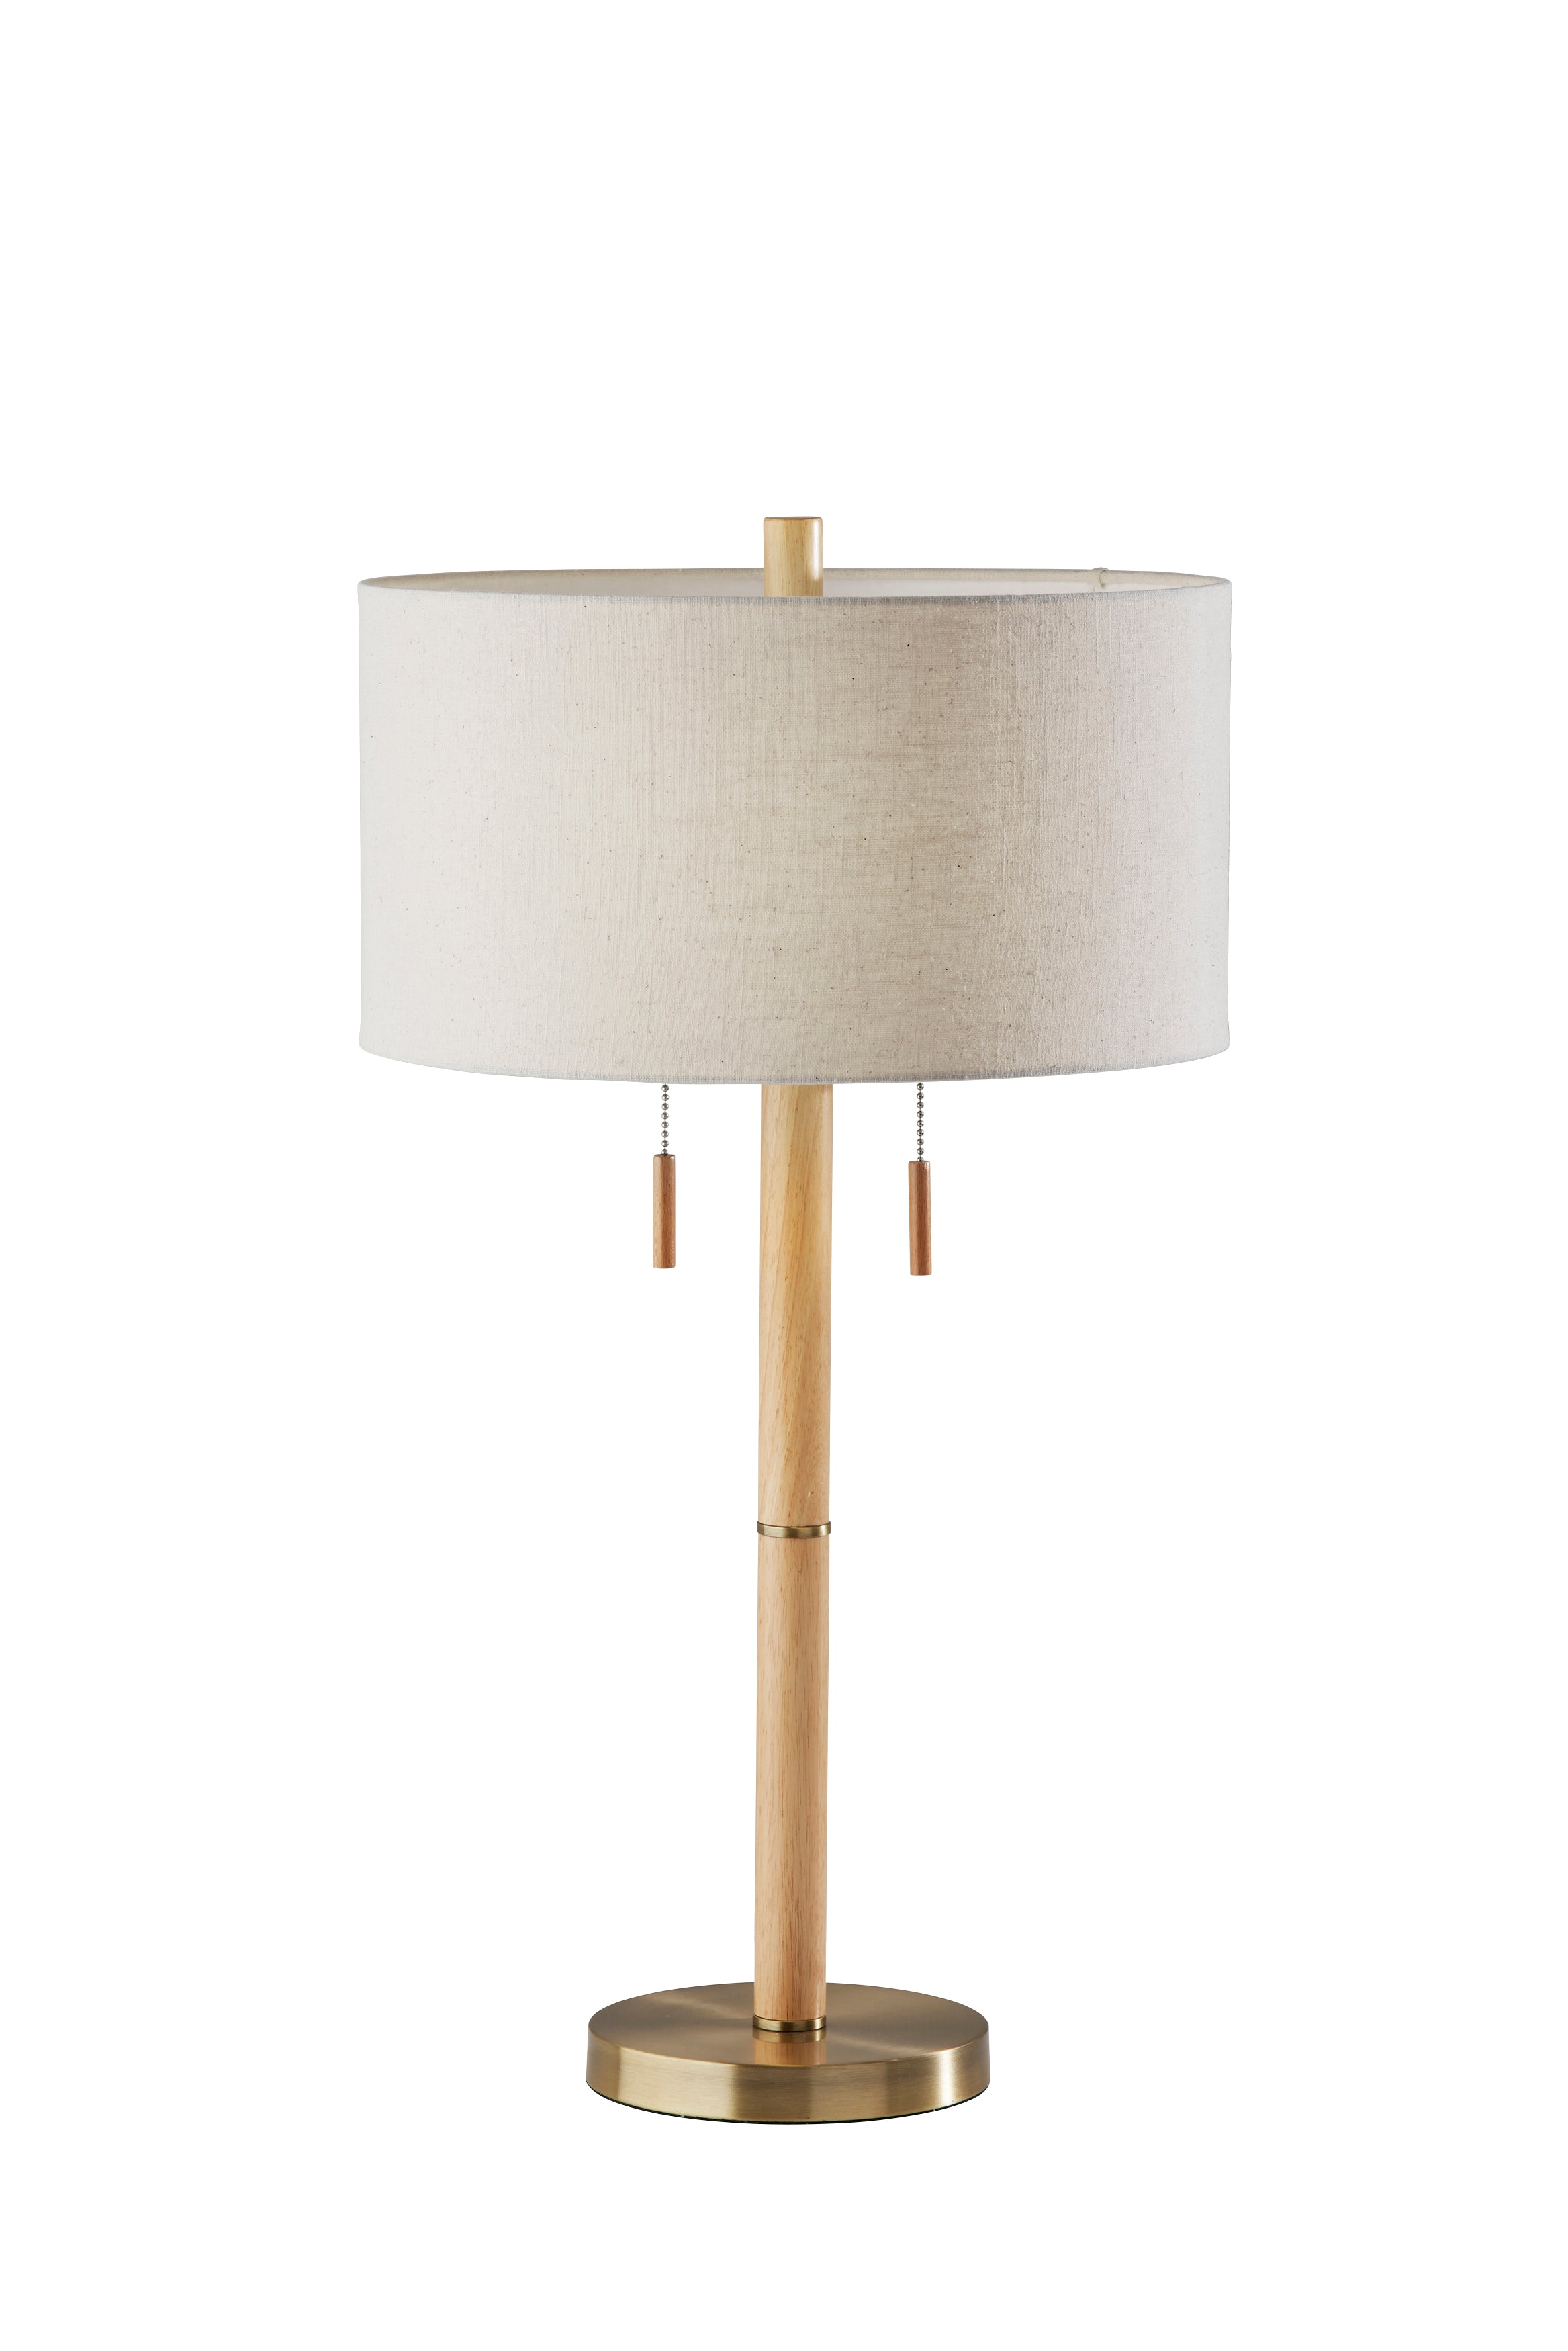 MADELINE Table lamp Wood, Gold - 3374-12 | ADESSO